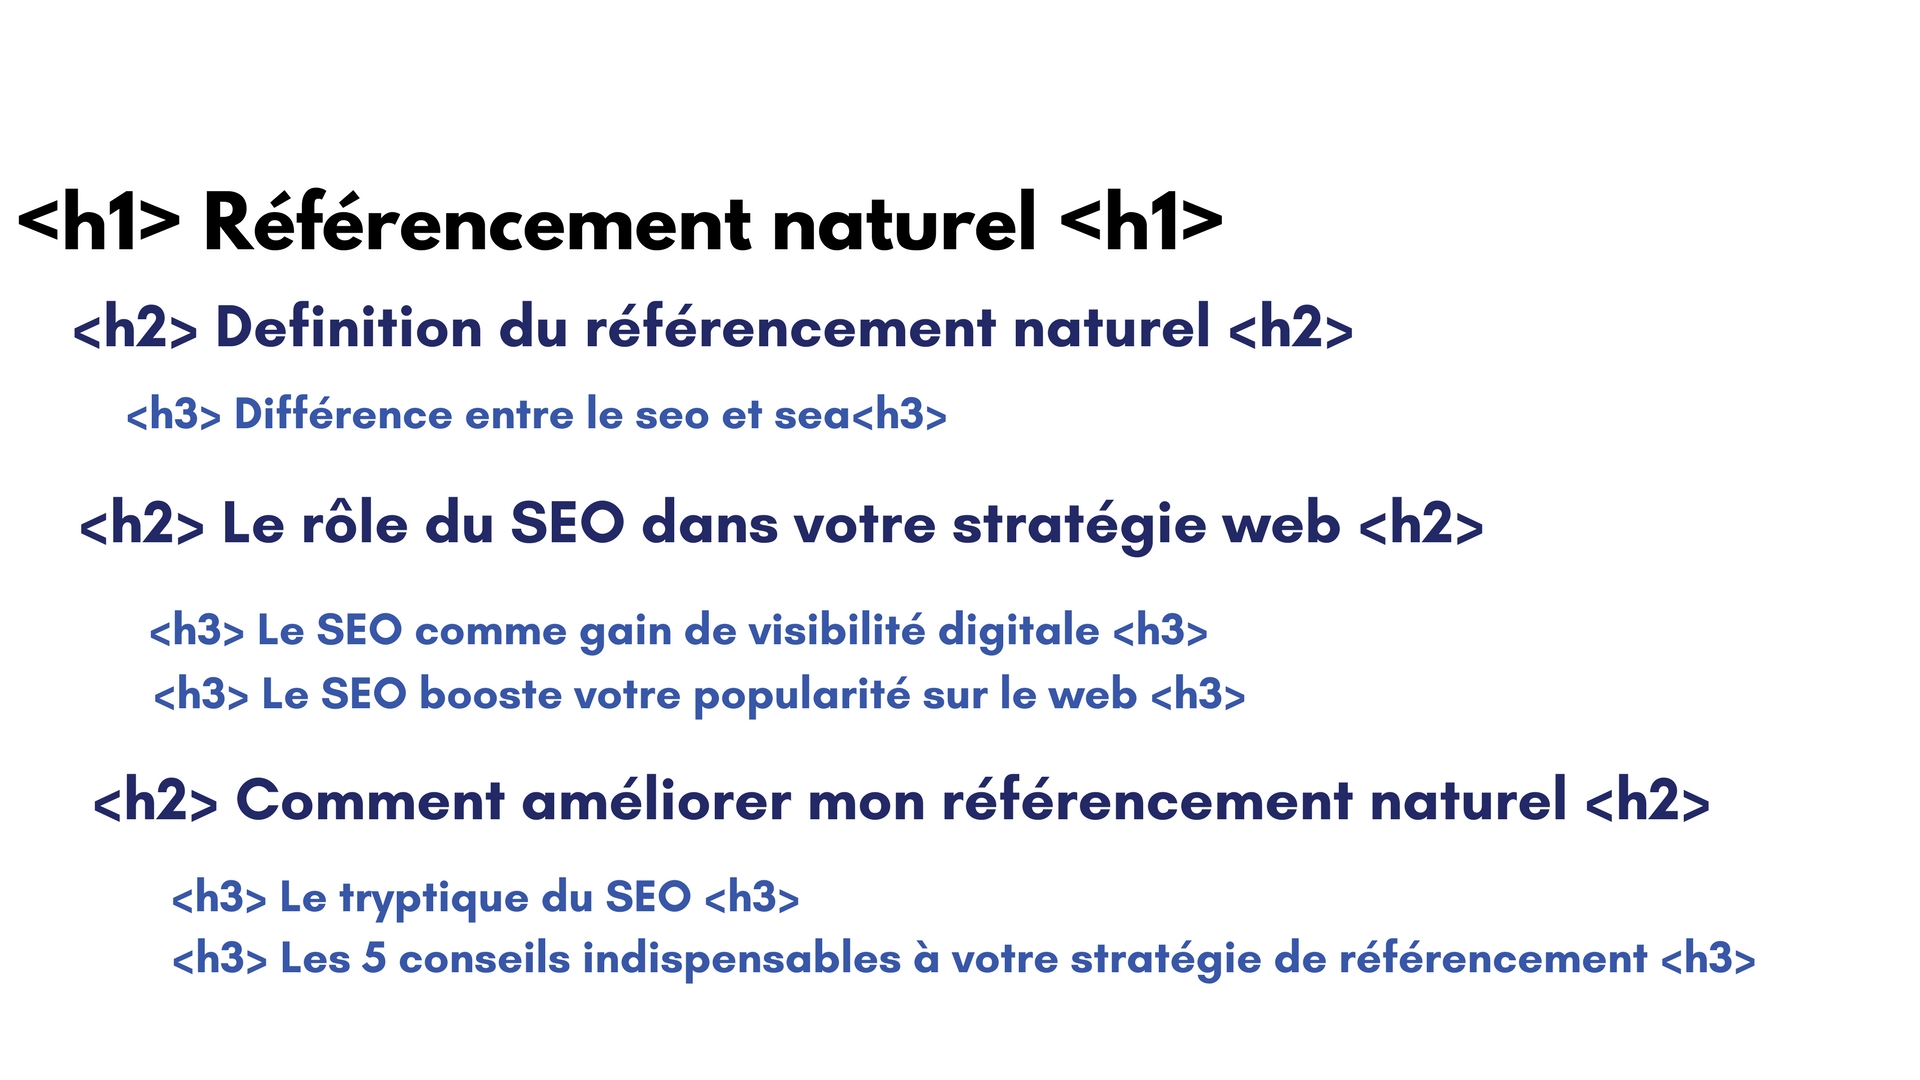 h1 seo referencement naturel cms